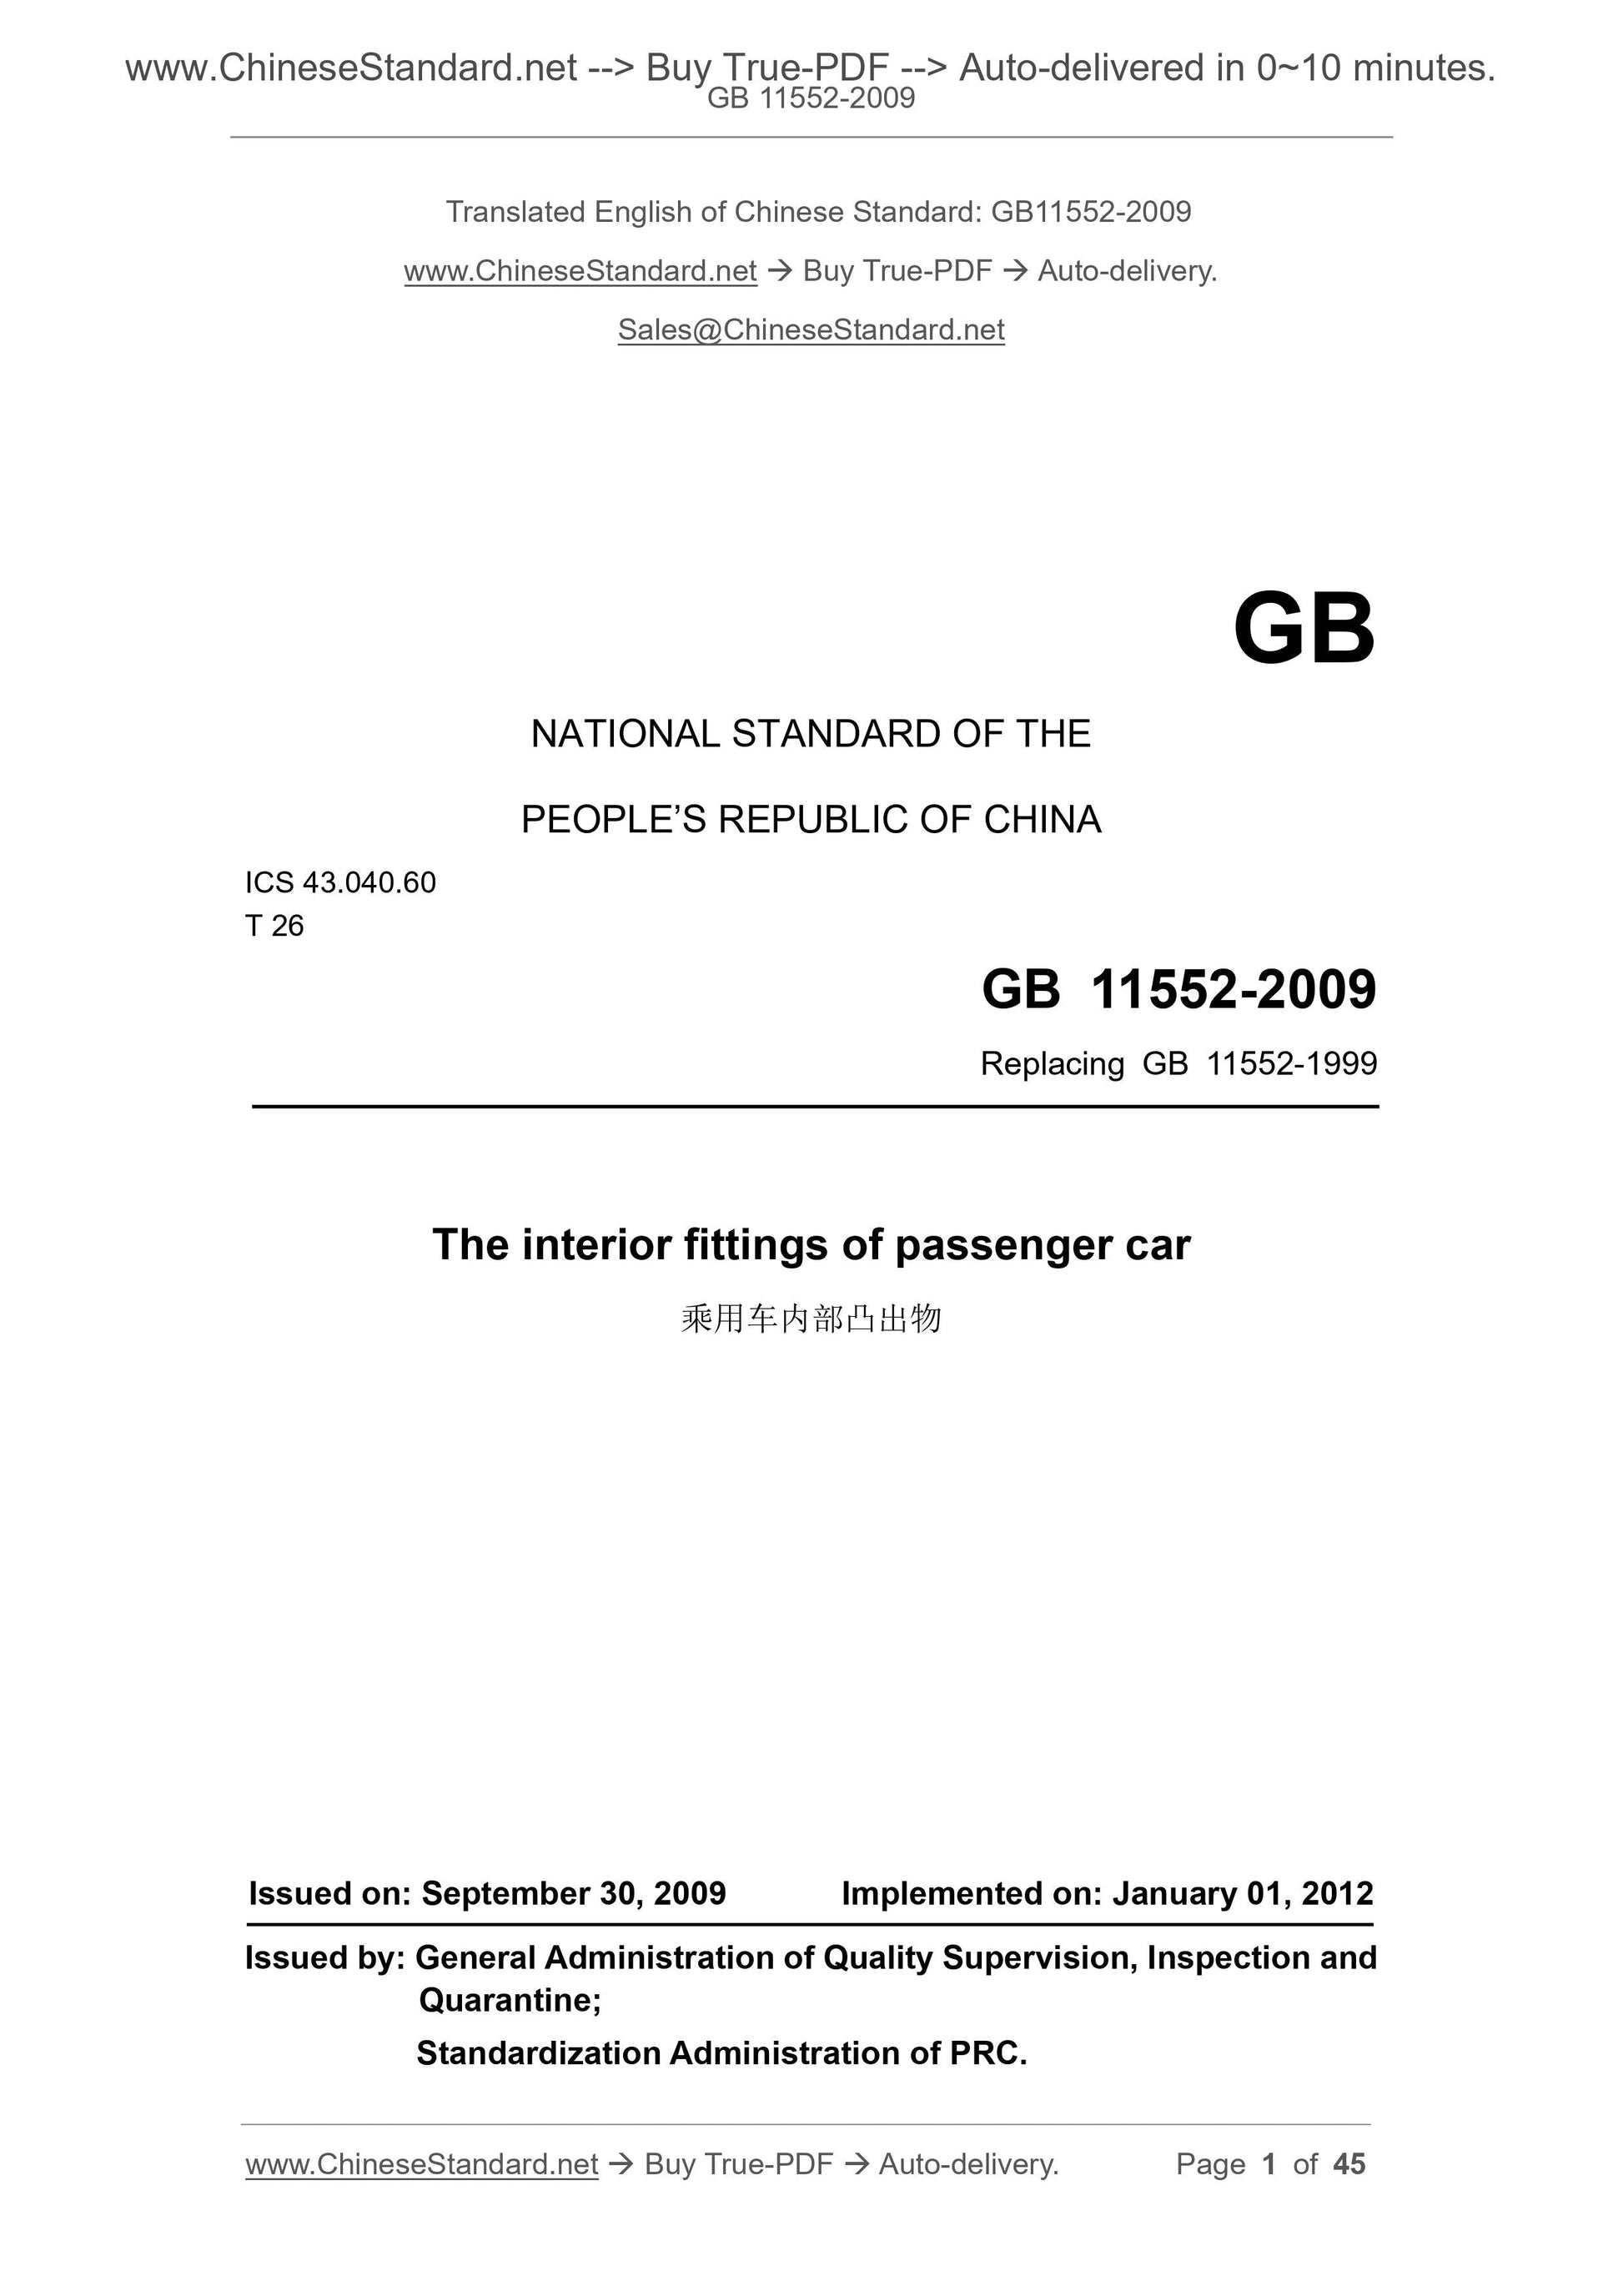 GB 11552-2009 Page 1